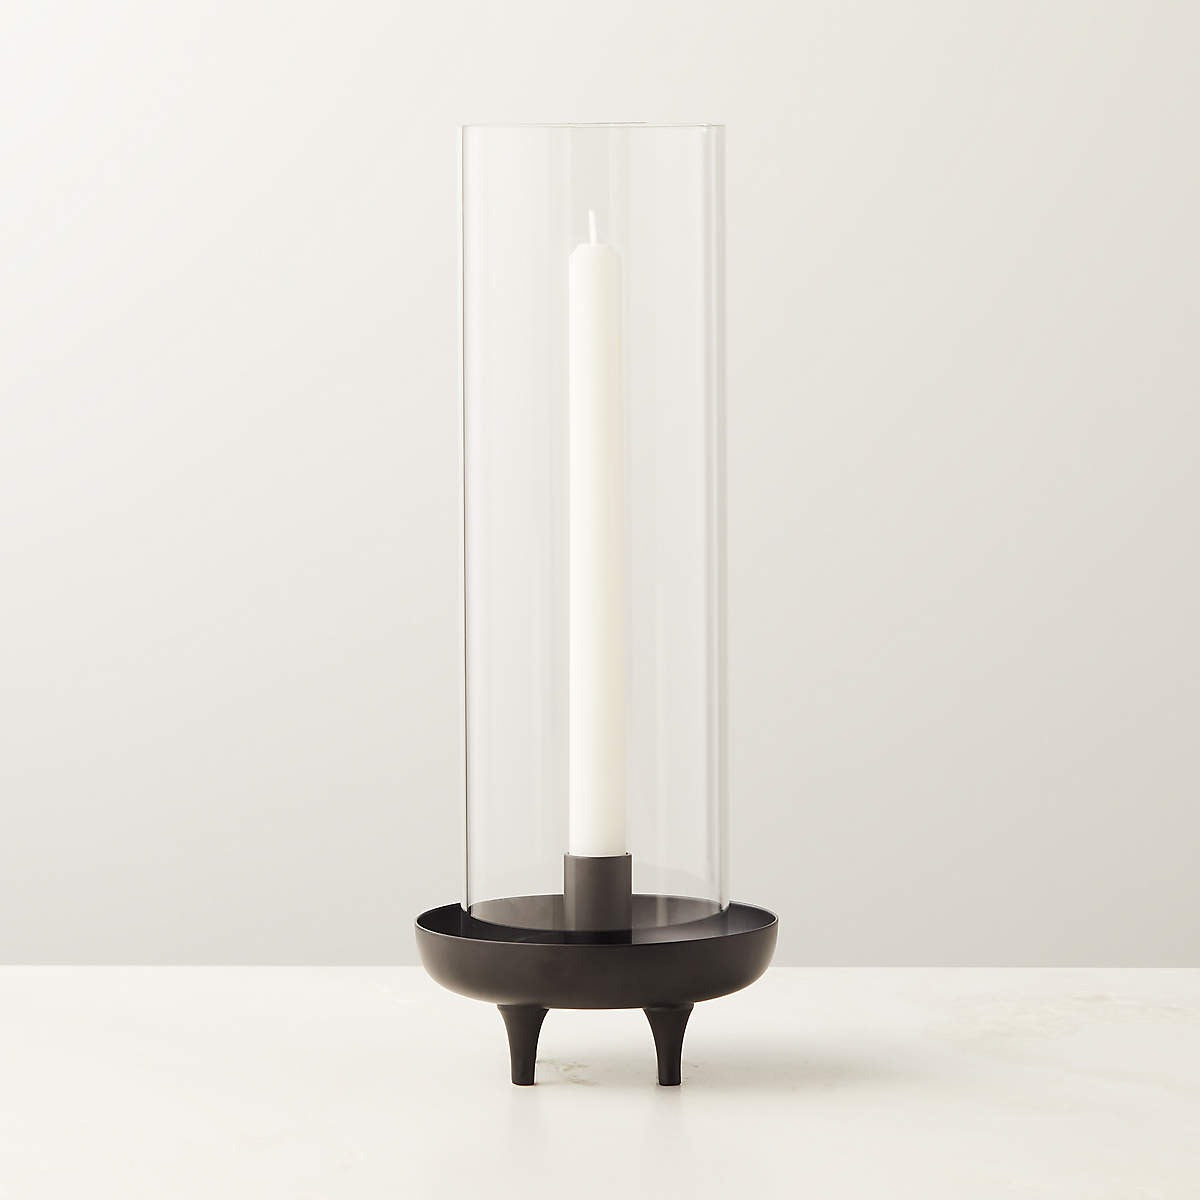 VETRO MATTE BLACK STAINLESS STEEL AND GLASS HURRICANE CANDLE HOLDER